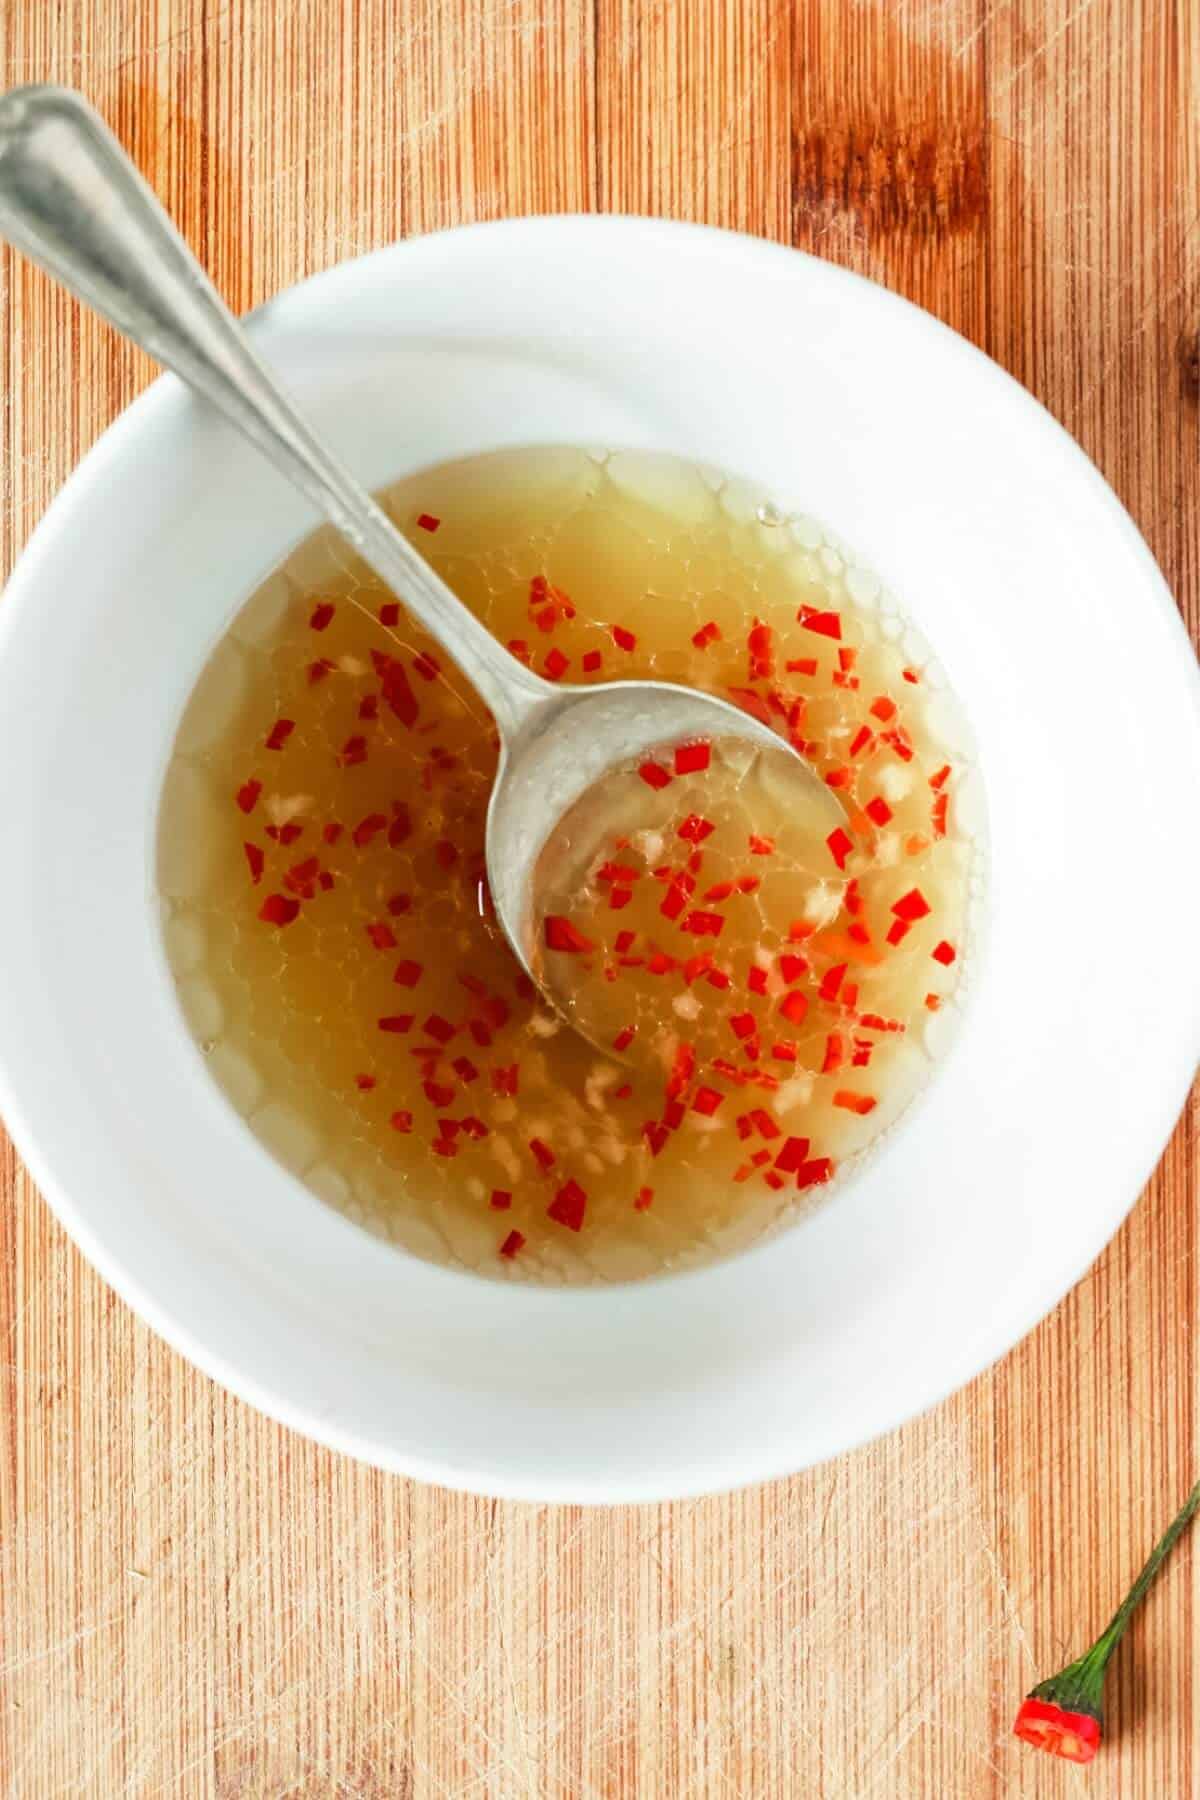 A silver spoon sitting in a bowl of salad dressing with finely chopped red chilli.